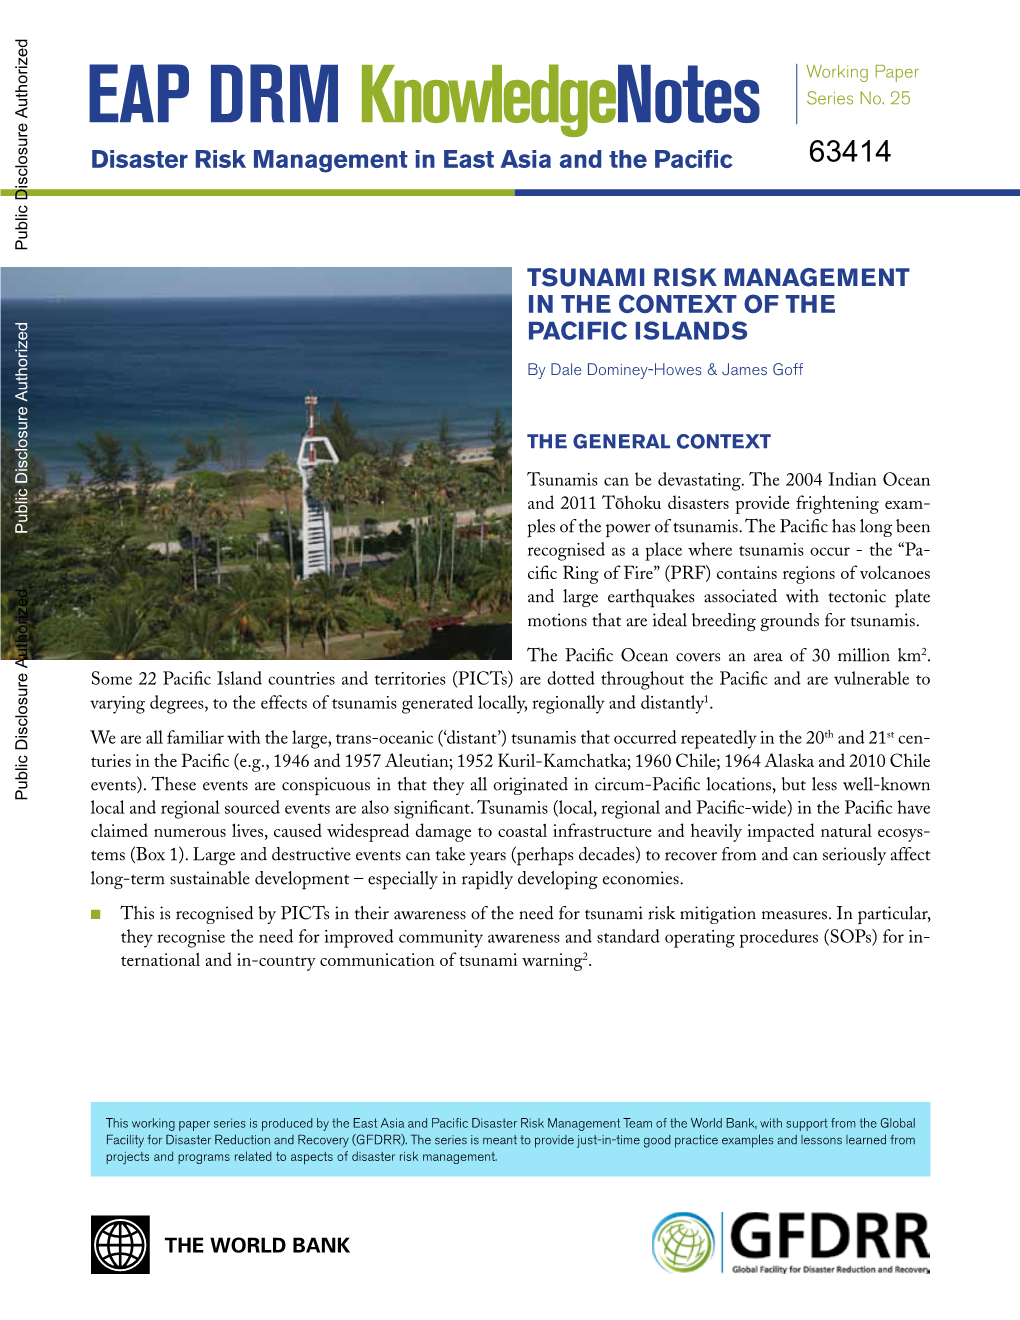 Tsunami Risk Management in the Context of the Pacific Islands